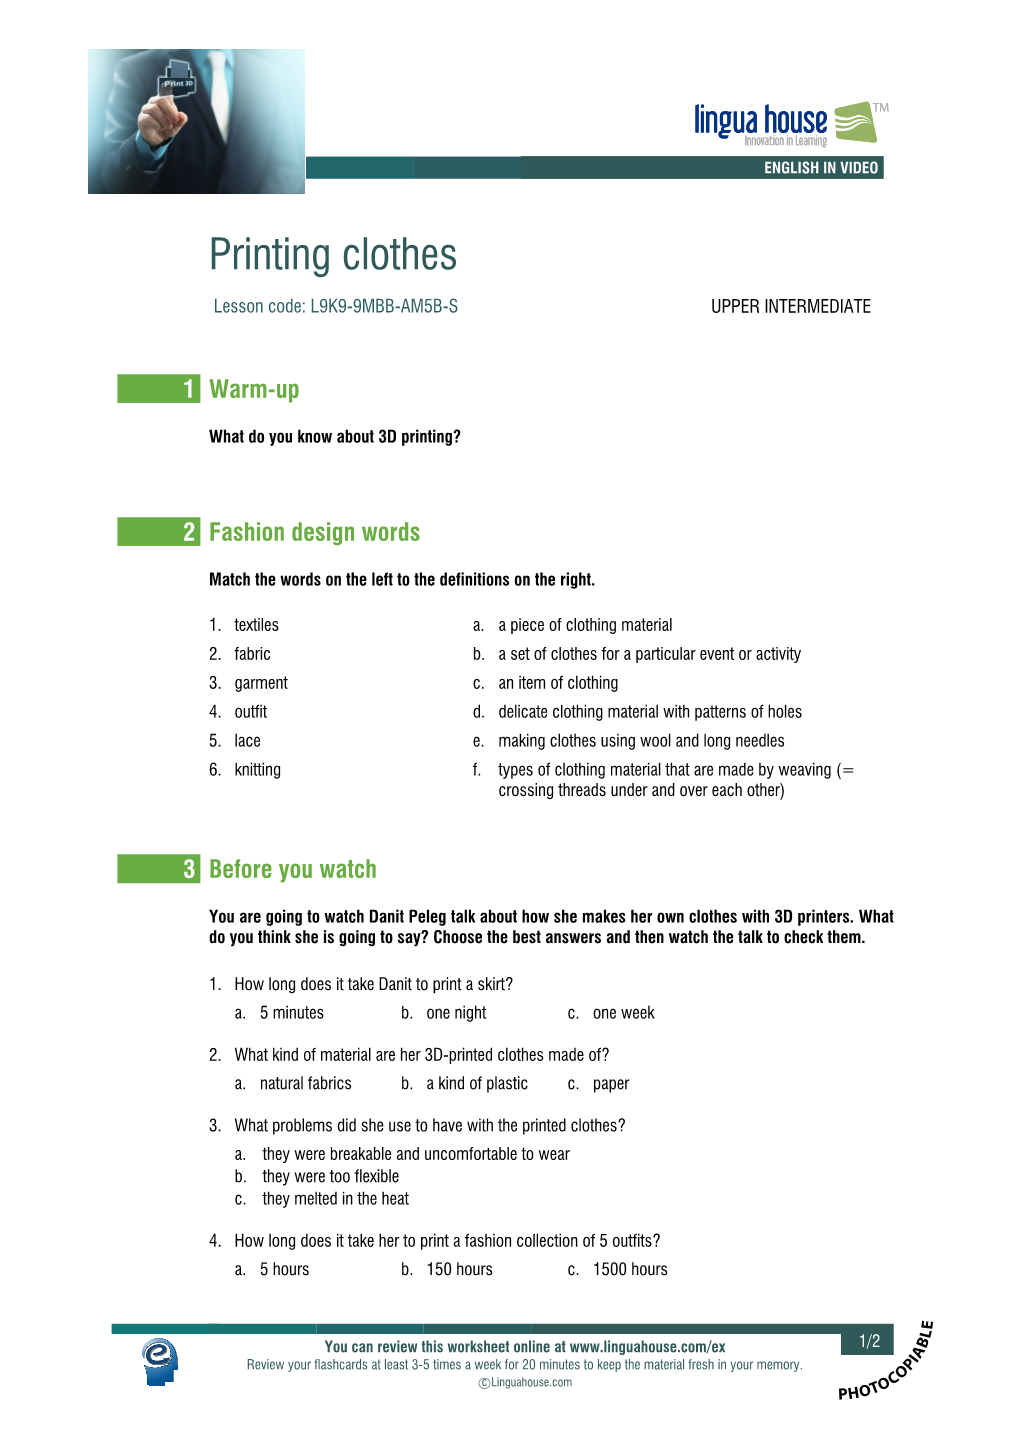 Printing Clothes